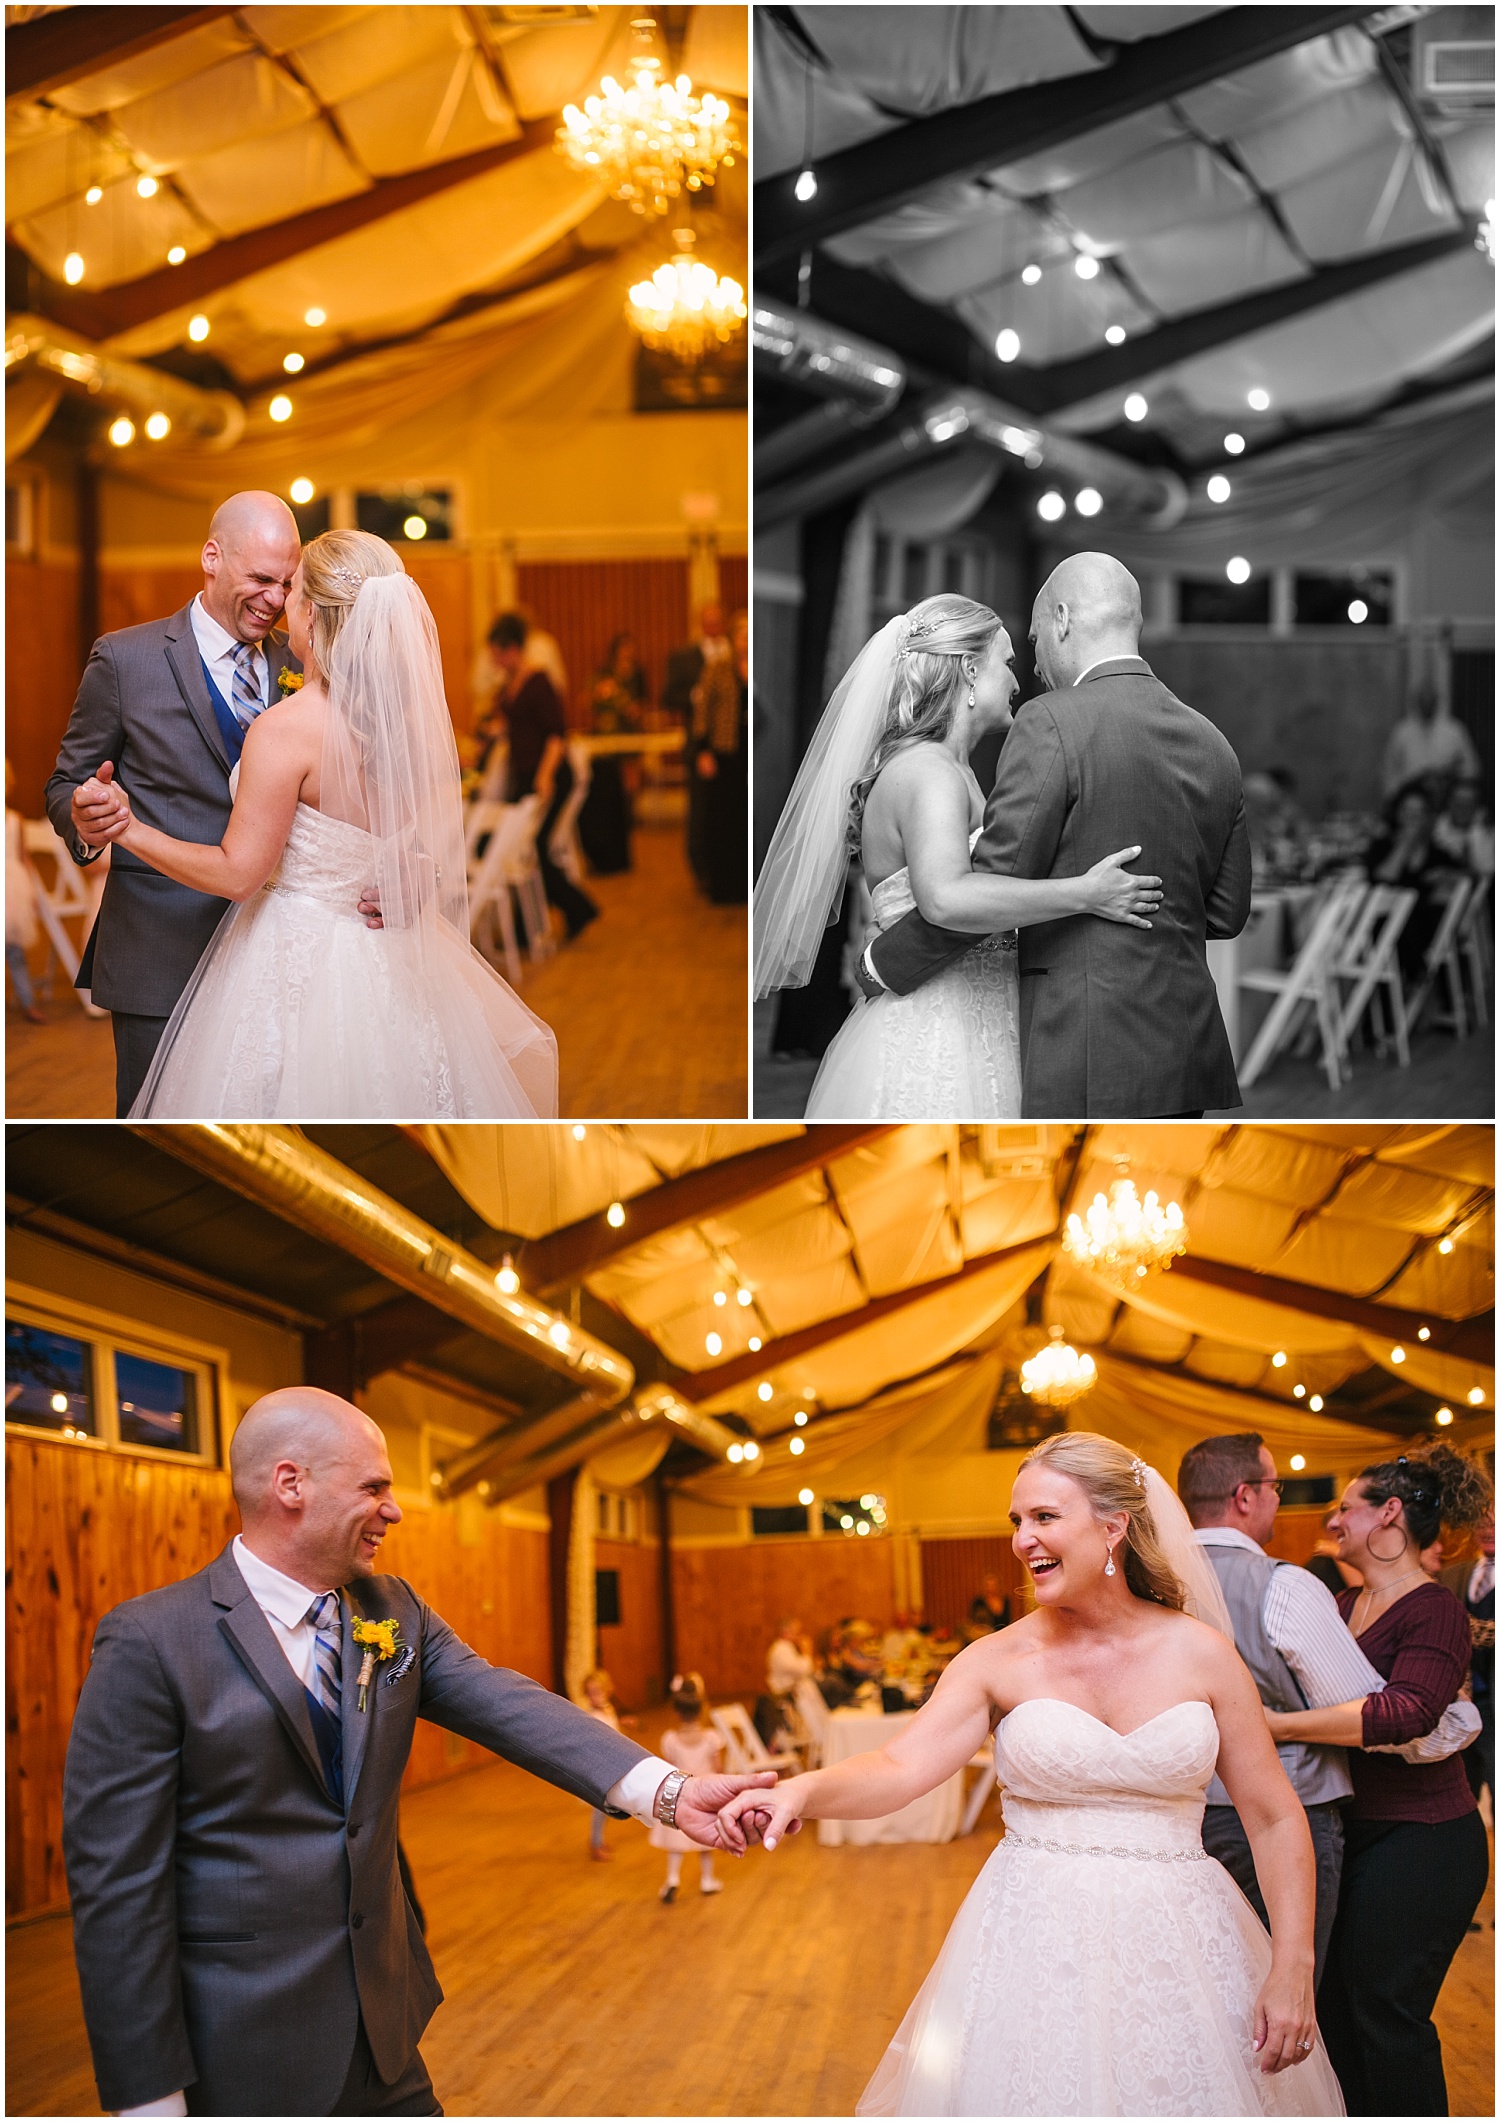 Bride and groom's first dance at Rustic Lace Barn wedding reception